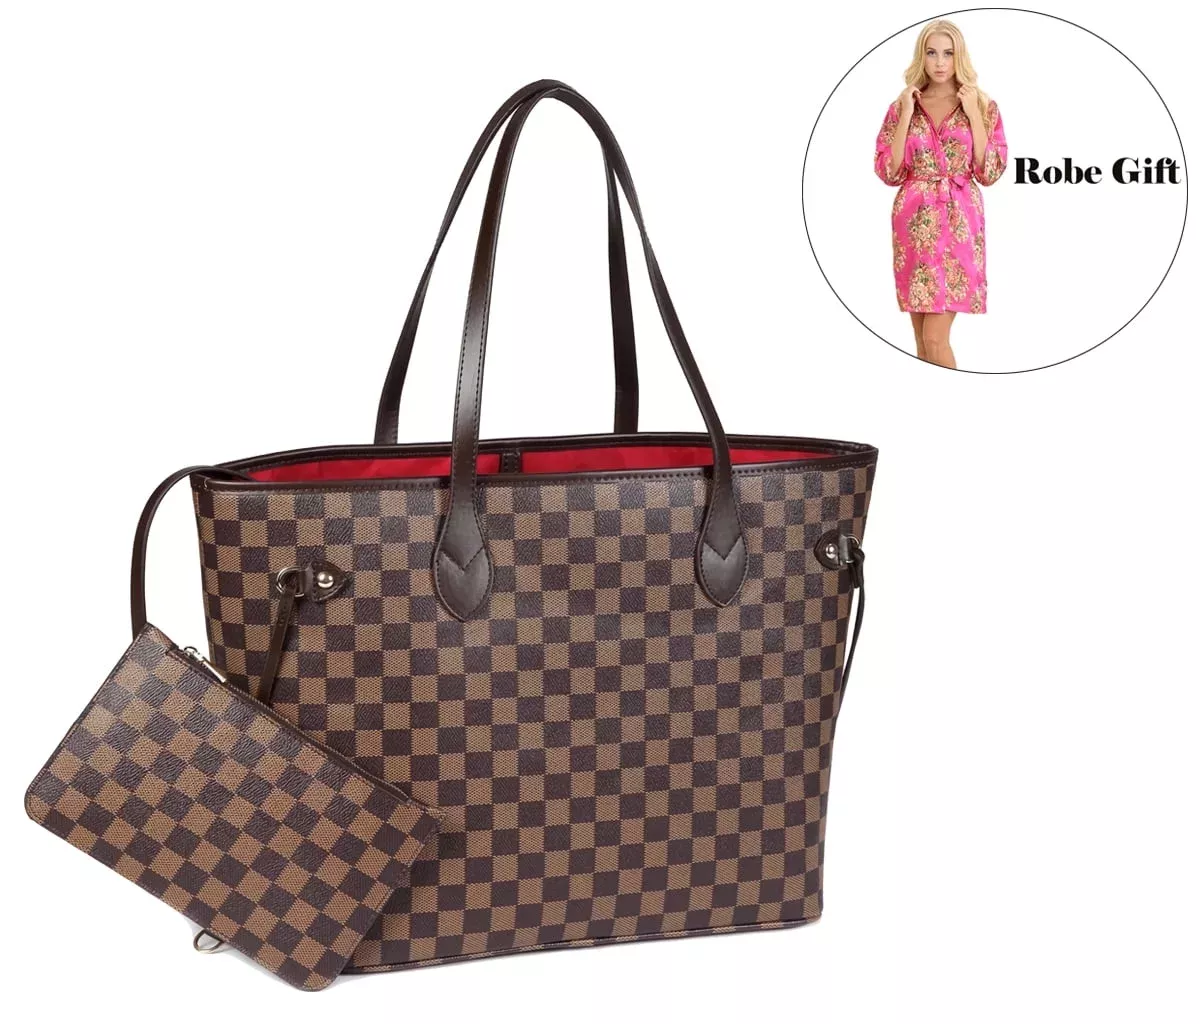 Richports Women's Checkered Tote Shoulder Bag